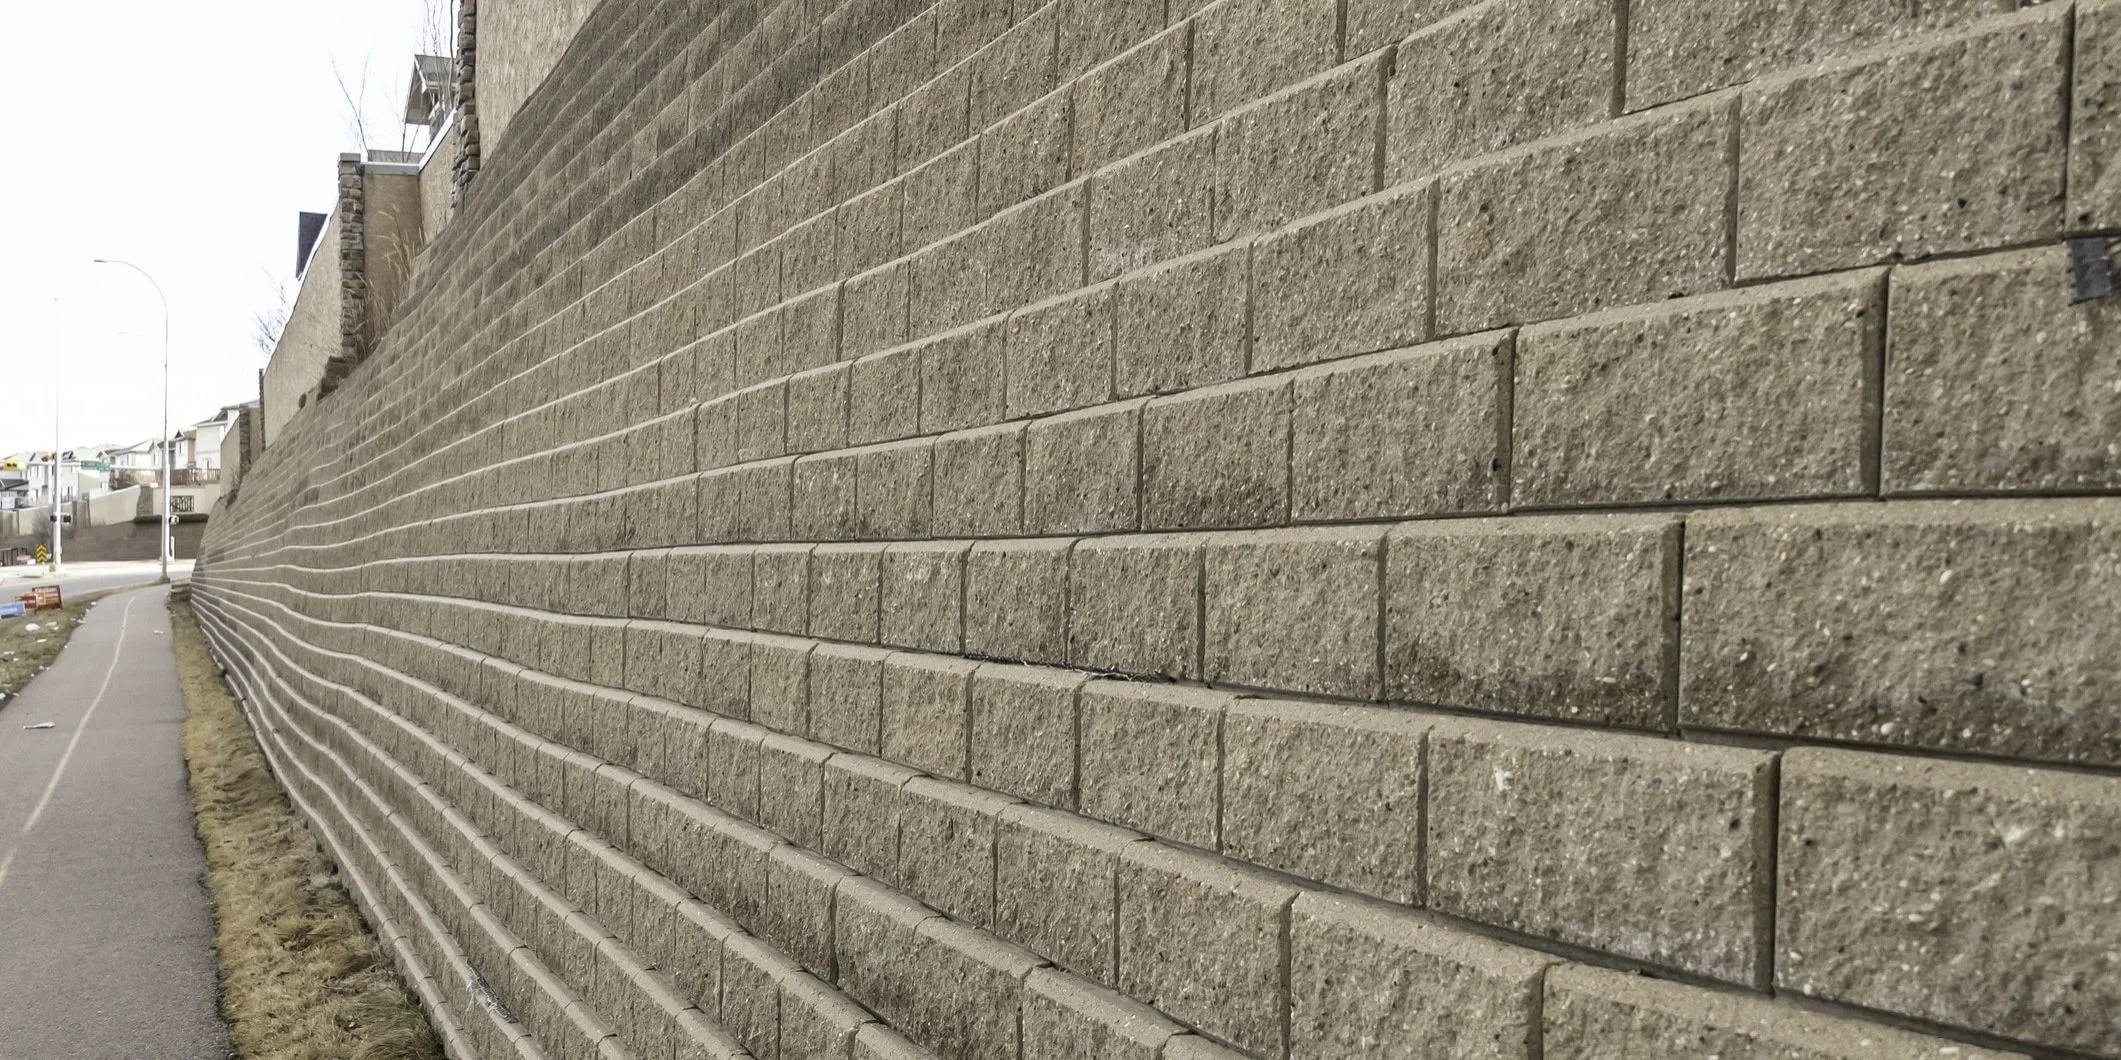 Retaining Wall Failures and Construction Defect Claims